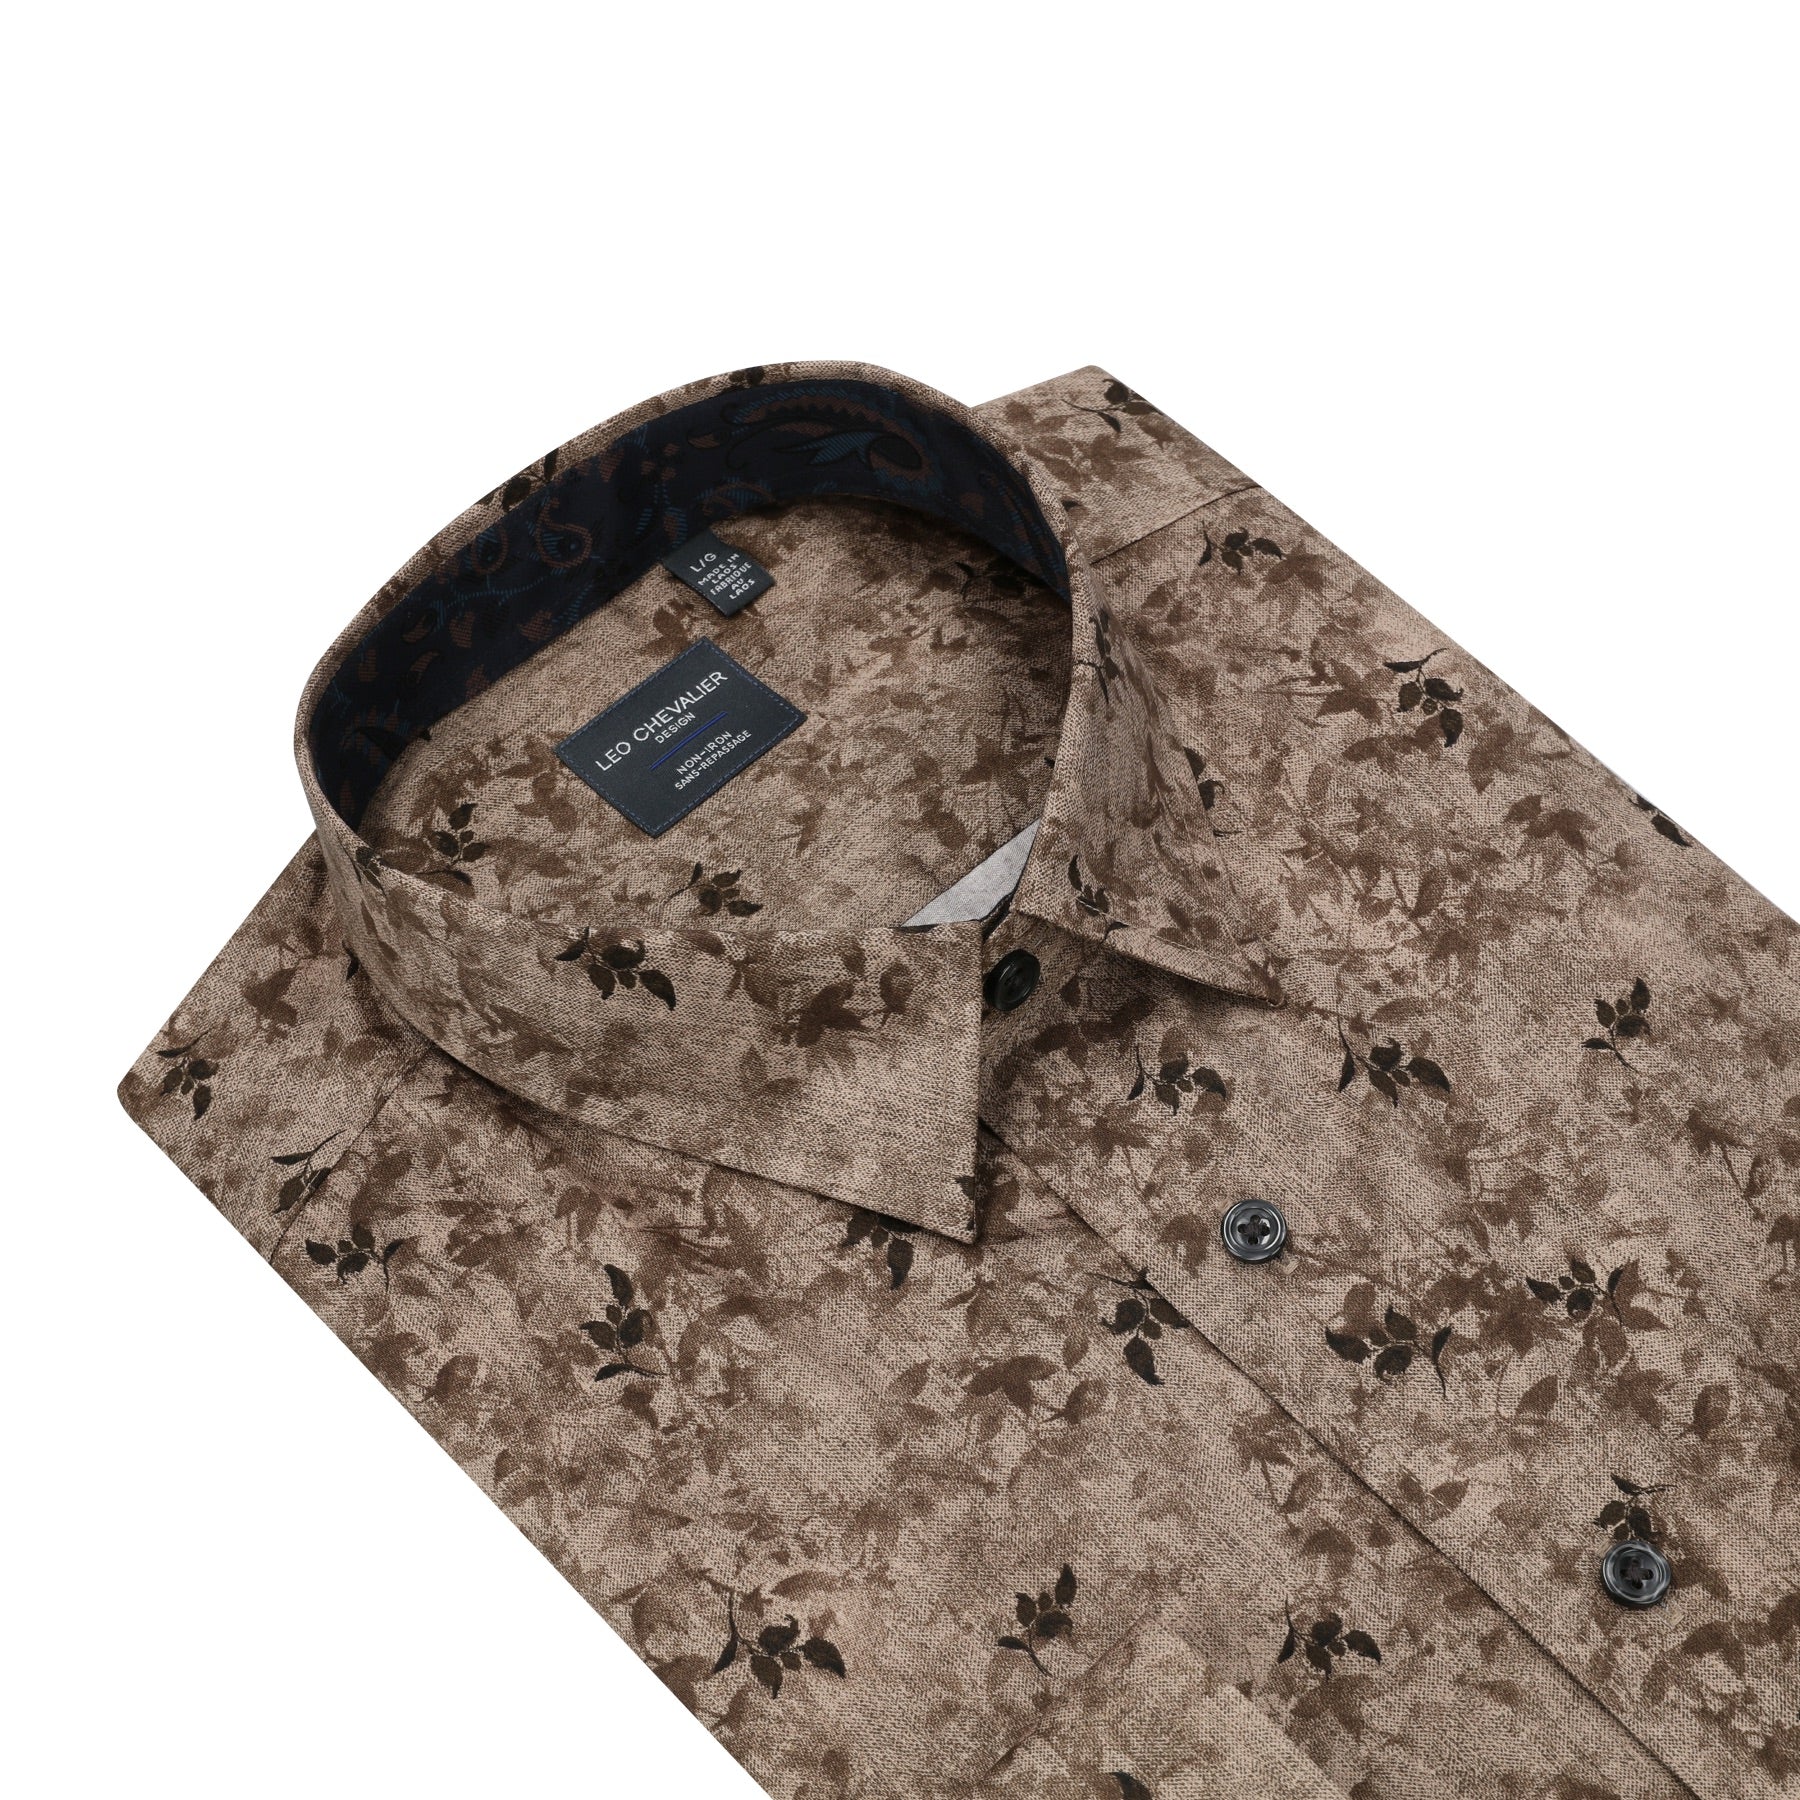 Earth and Brown Branch Print No-Iron Cotton Sport Shirt with Hidden Button Down Collar by Leo Chevalier